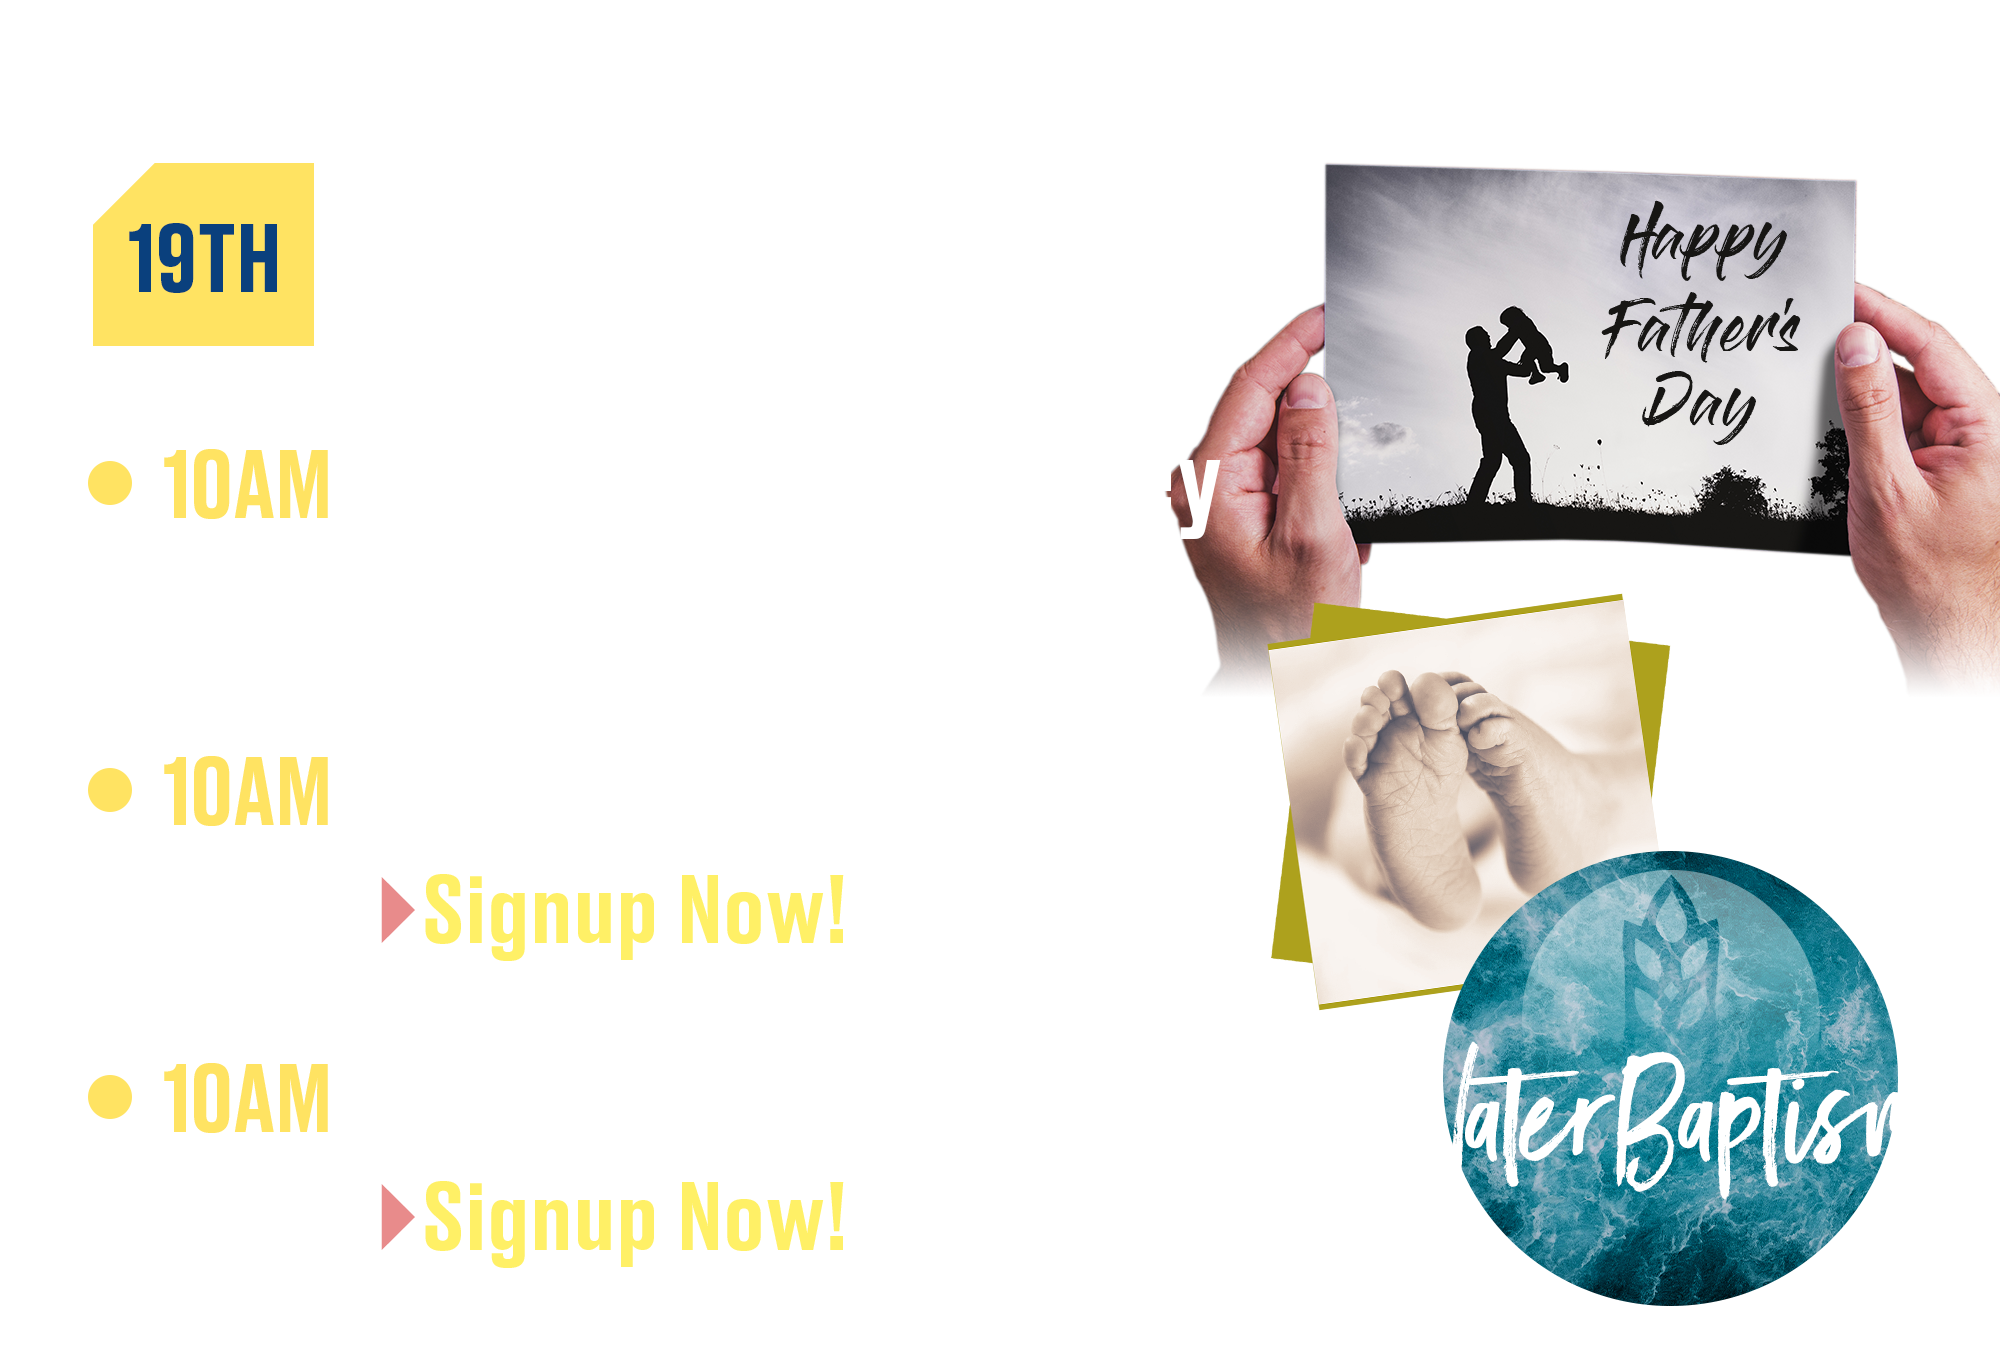 19th Sunday Morning at the Harv Happy Fathers Day at 10:00 am